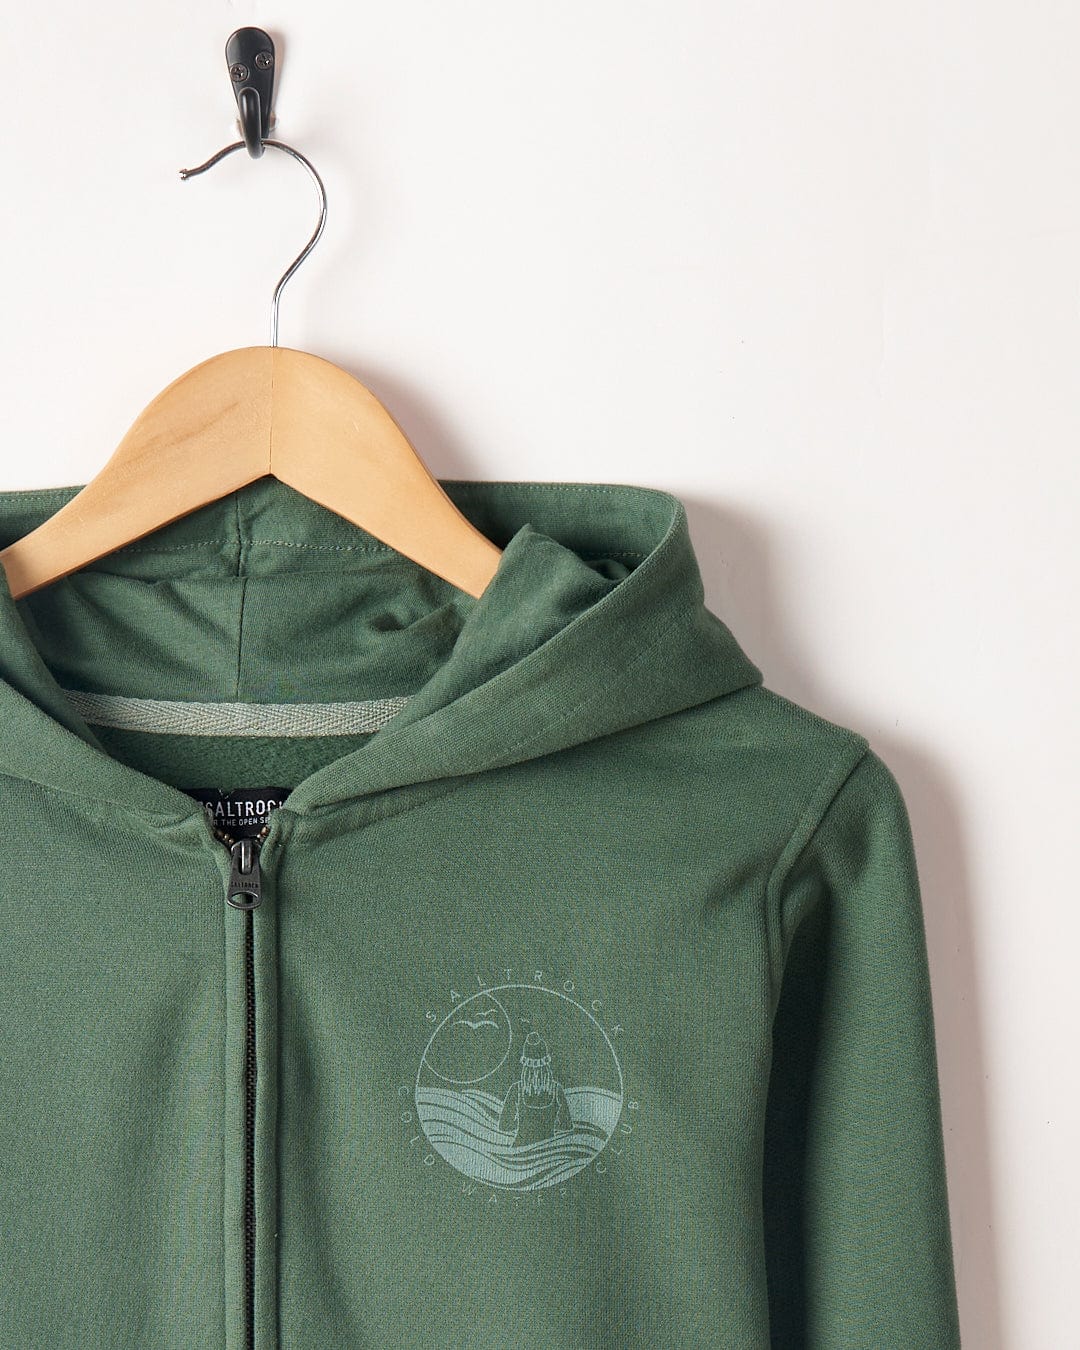 A Coldwater Club - Ladies Zip Hoodie - Green with a front zipper hanging on a wooden hanger against a white background, featuring a circular Saltrock branding logo on the left chest area.